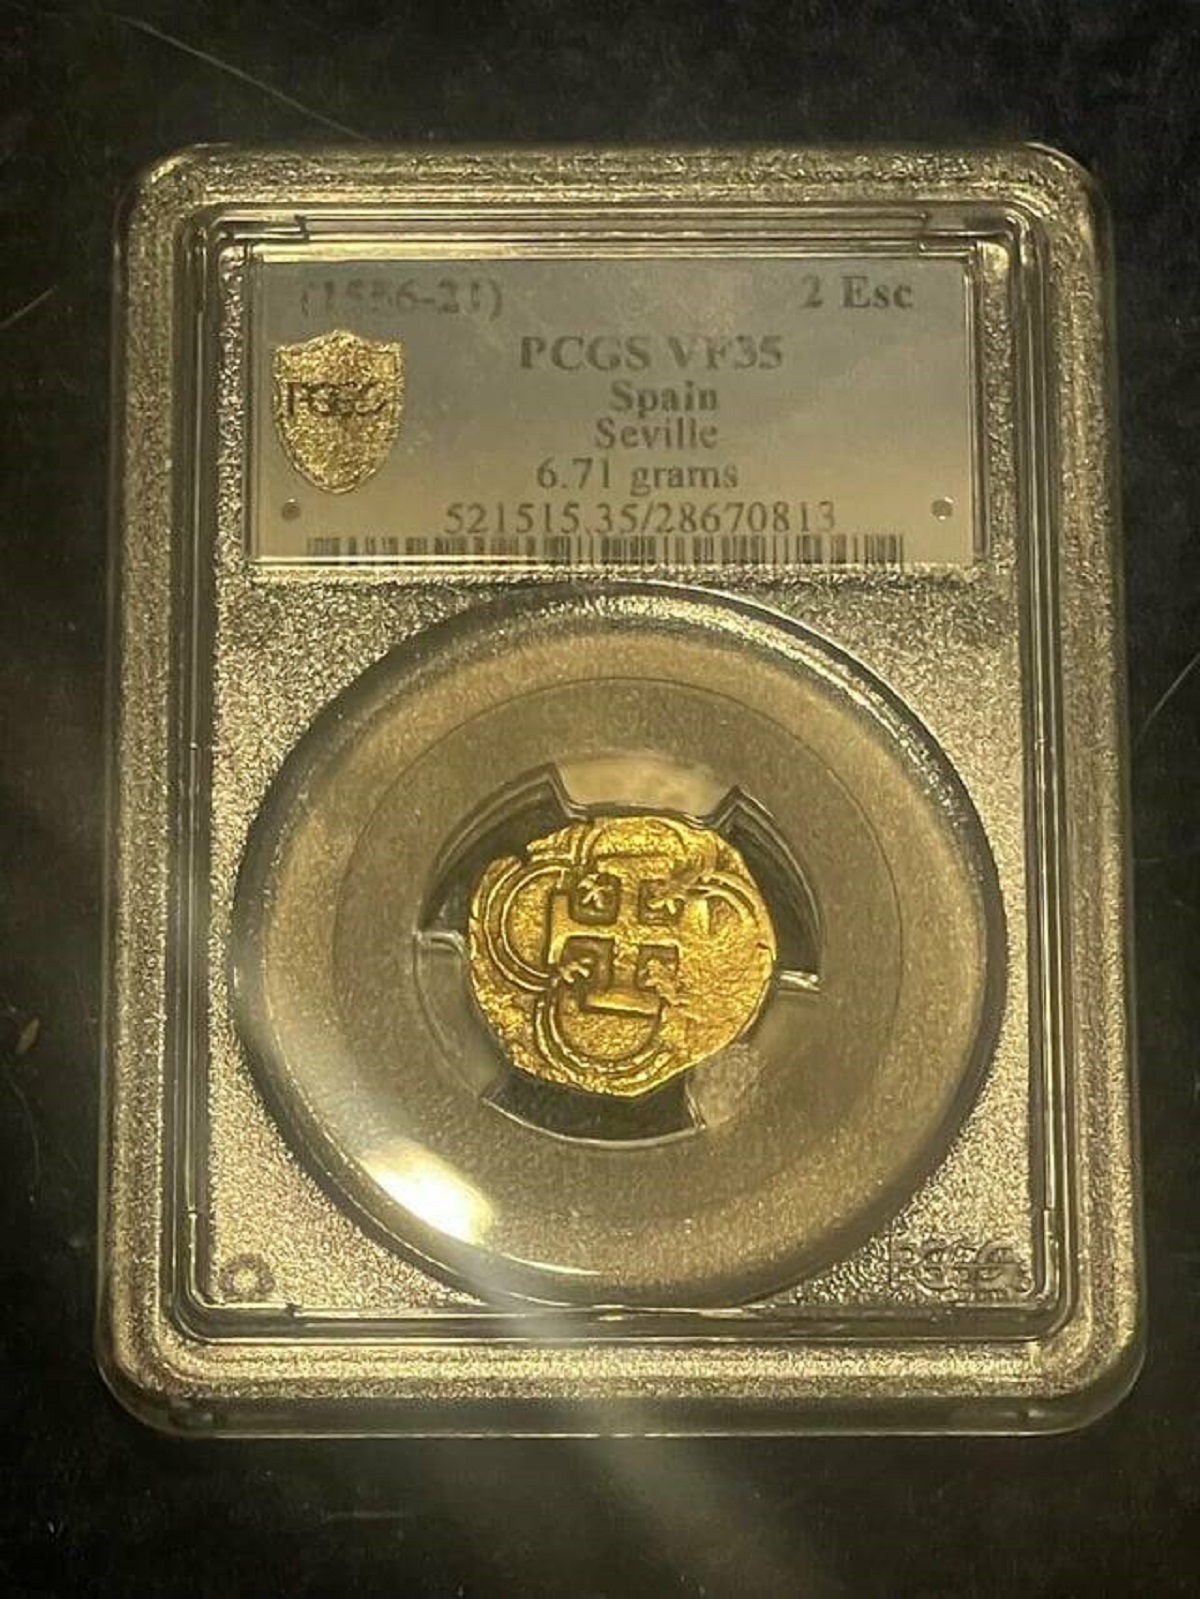 " ~500 year old 2 escudo gold doubloon (pirate treasure coin) 1 of 3 known examples"